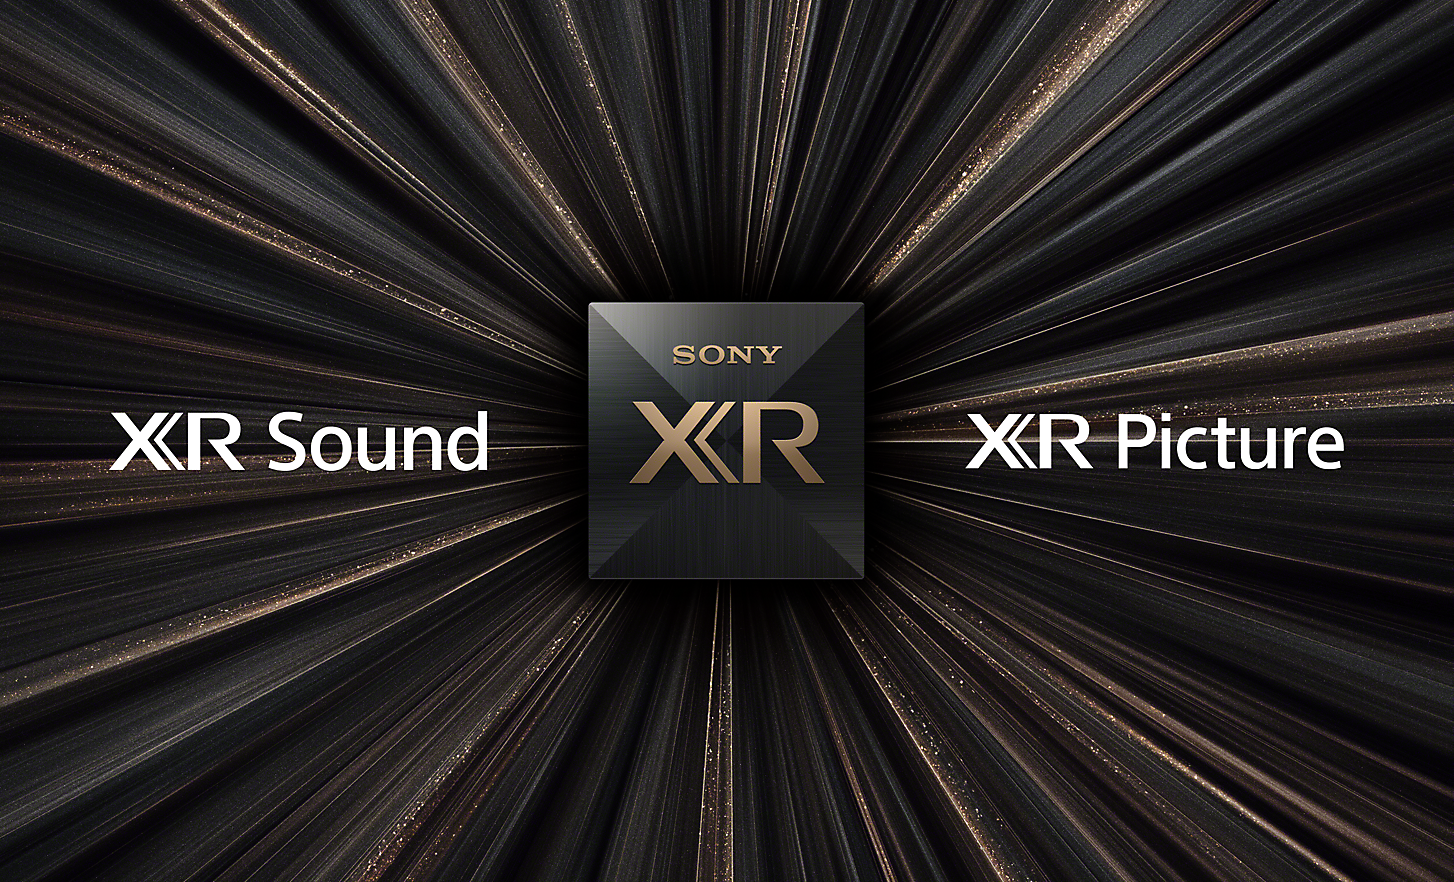 Image of Cognitive Processor XR chip on a black and gold starburst background with the words XR Picture and XR Sound highlighted